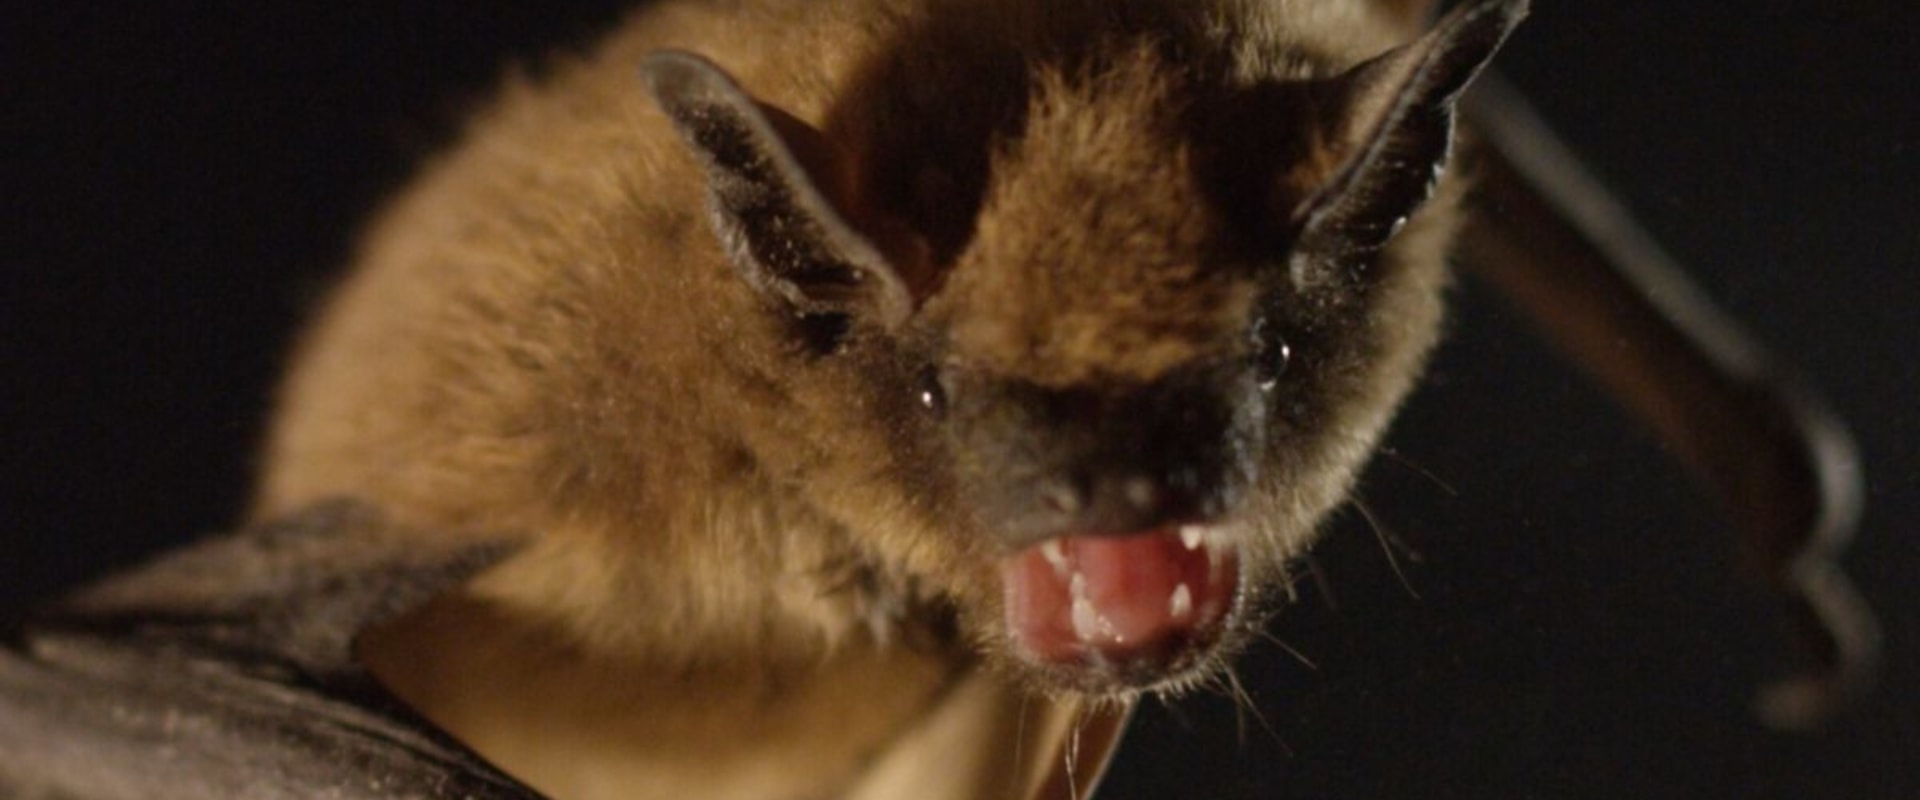 What attracts bats to your attic?